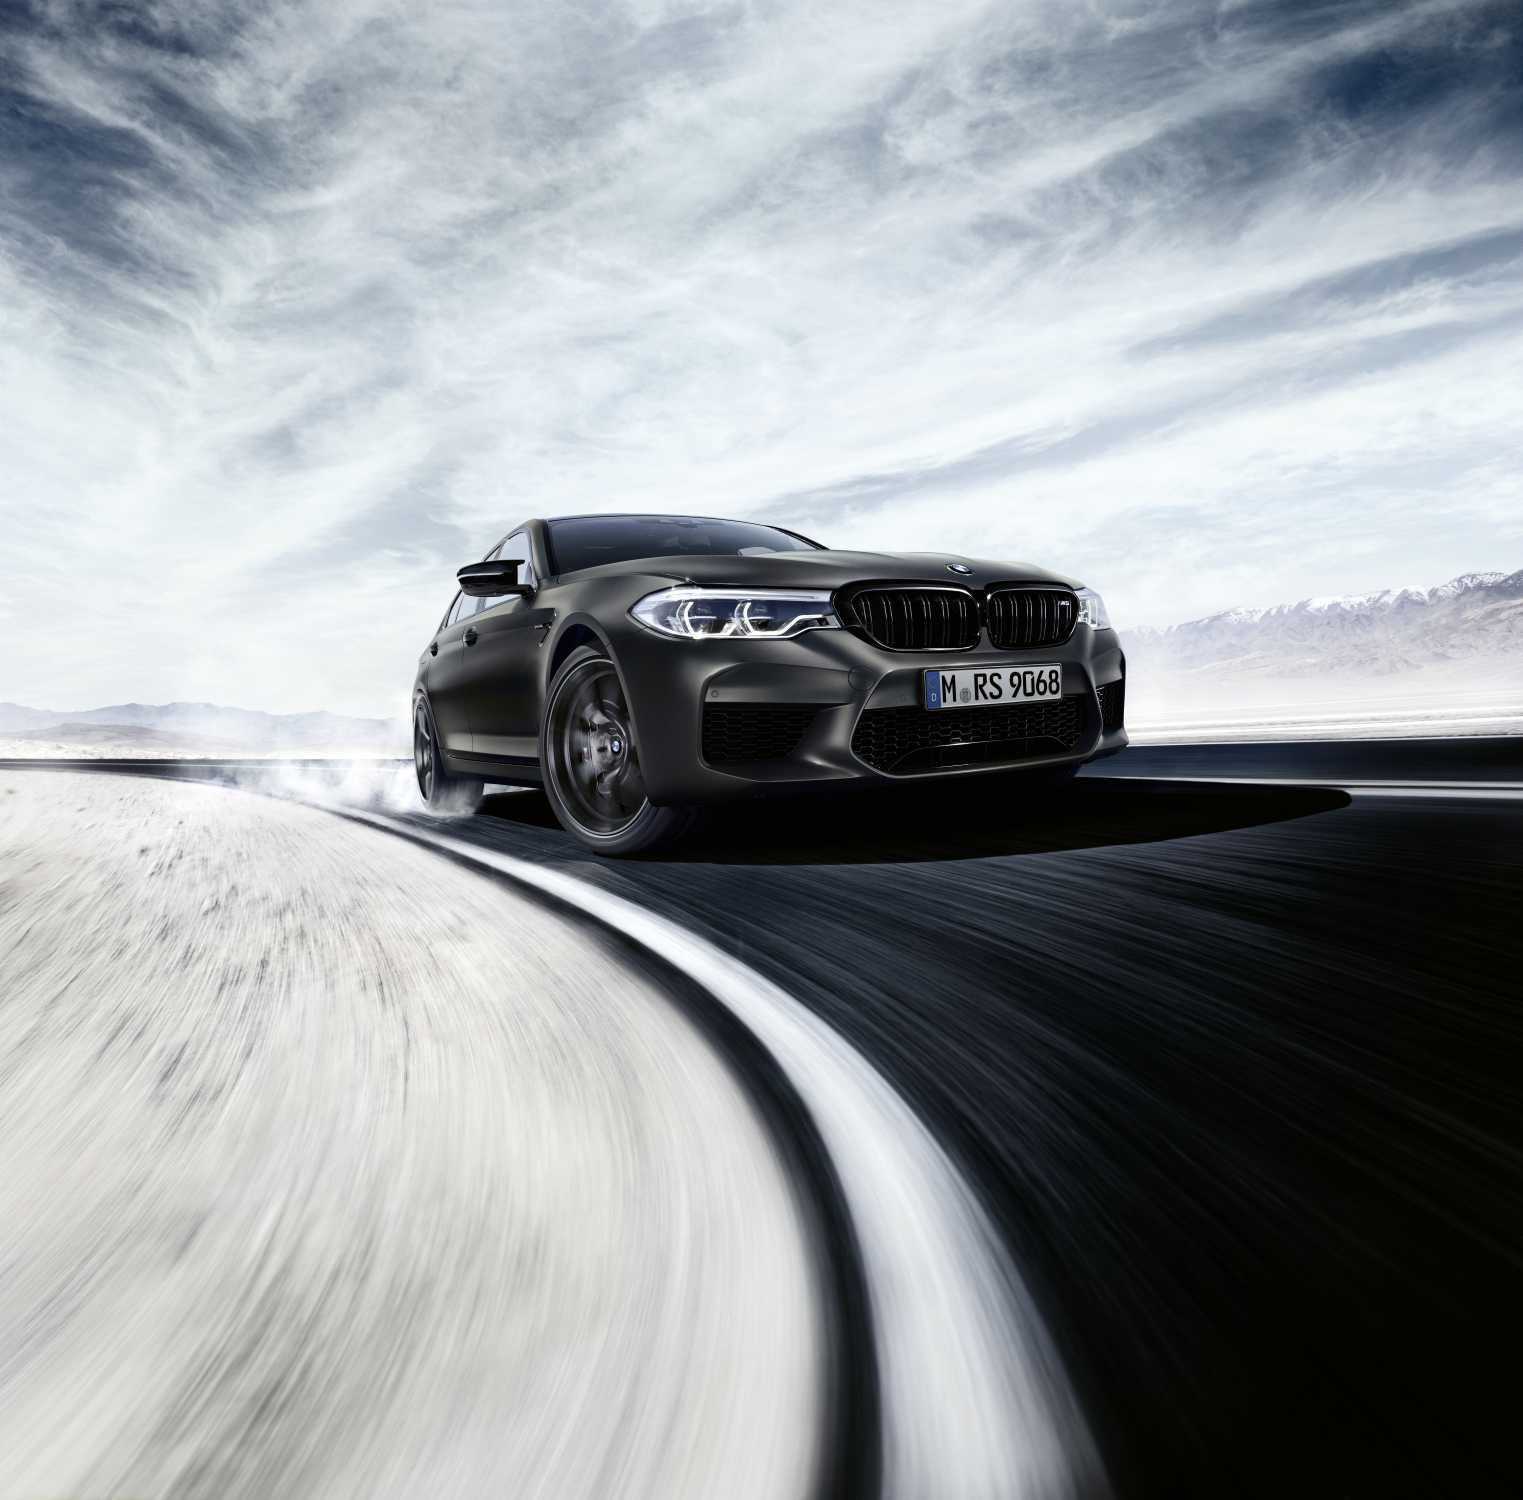 The new BMW M5 Edition 35 years (05/2019).